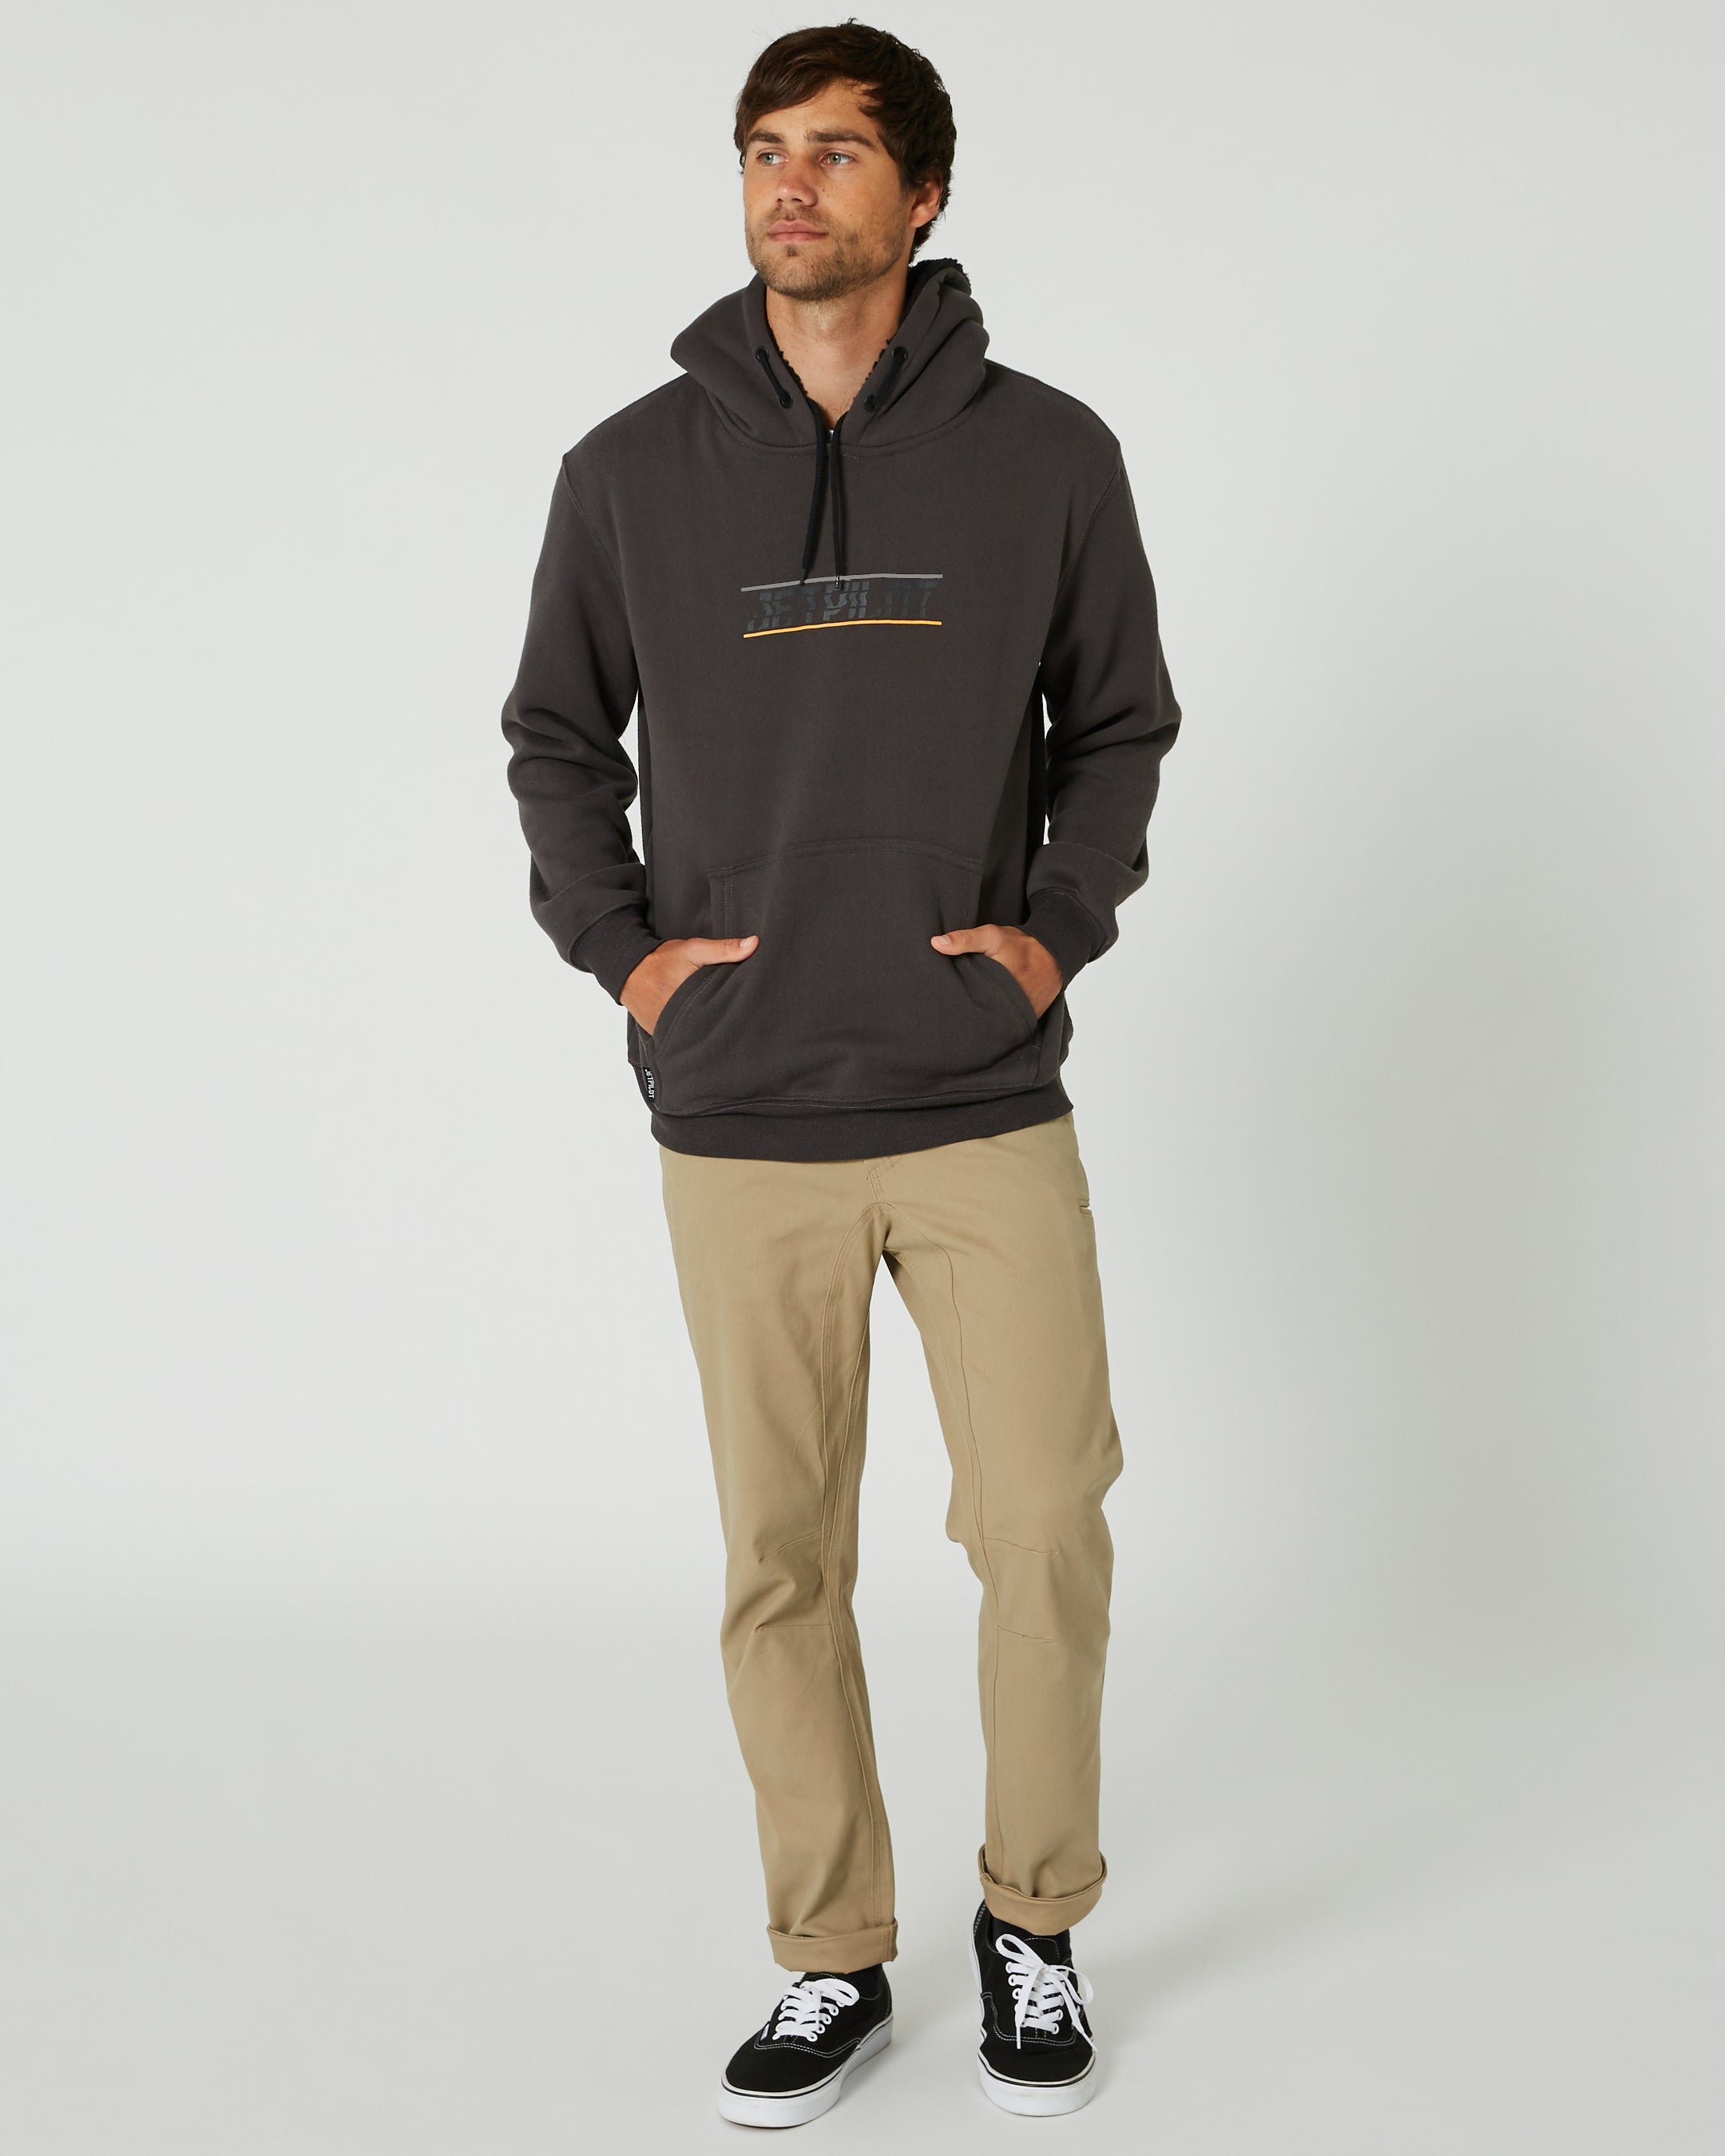 Jetpilot United Mens Pullover Hoodie - Charcoal 4